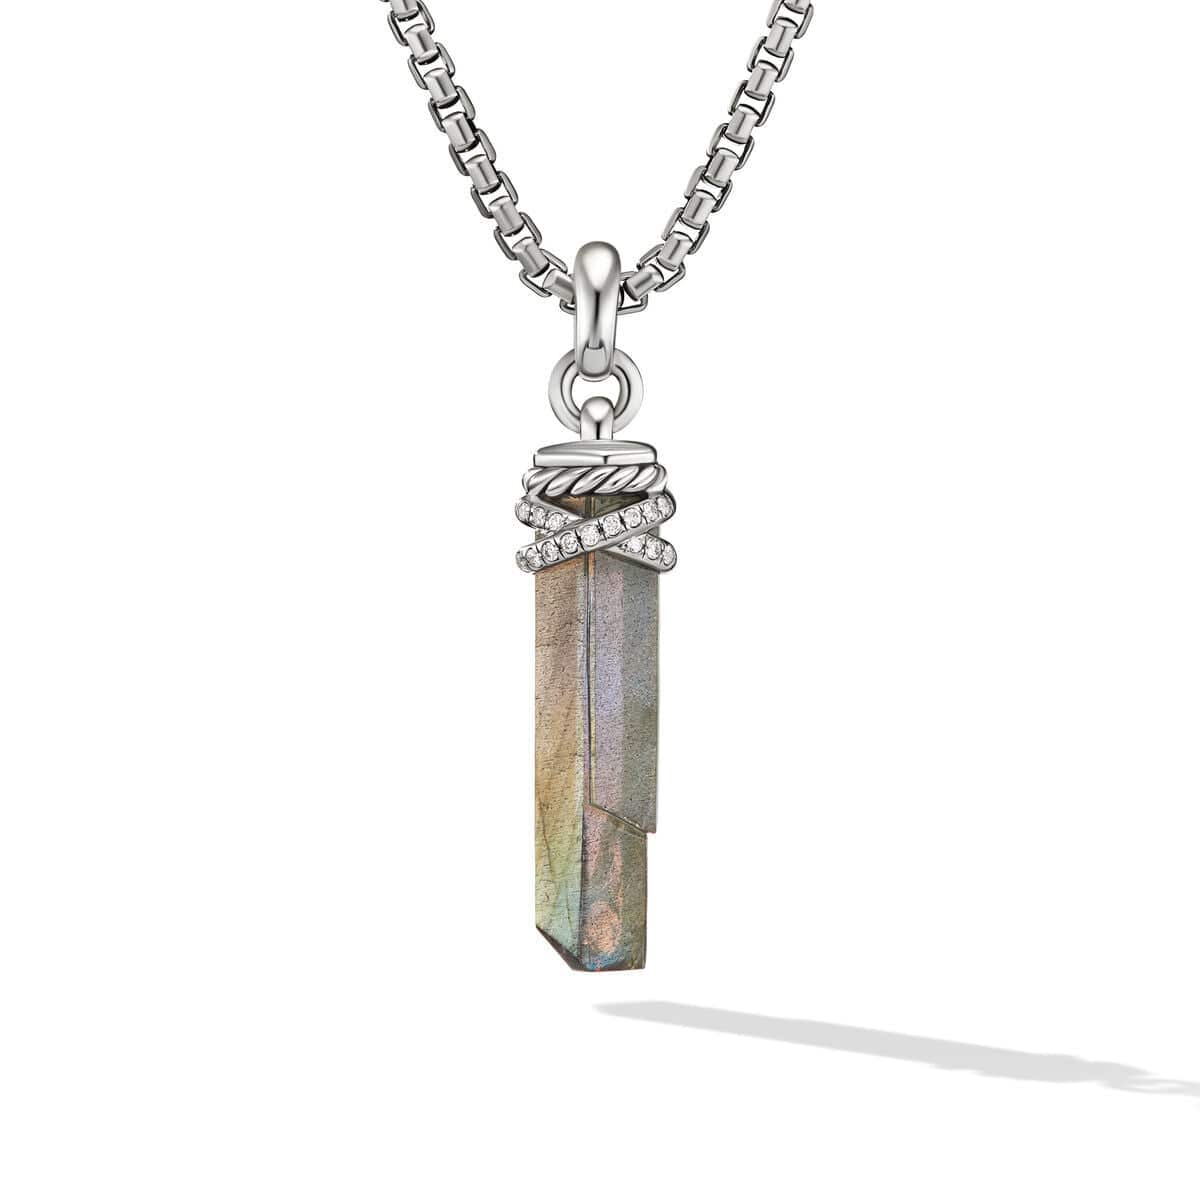 Wrapped Labradorite Crystal Amulet with Sterling Silver and Pavé Diamonds